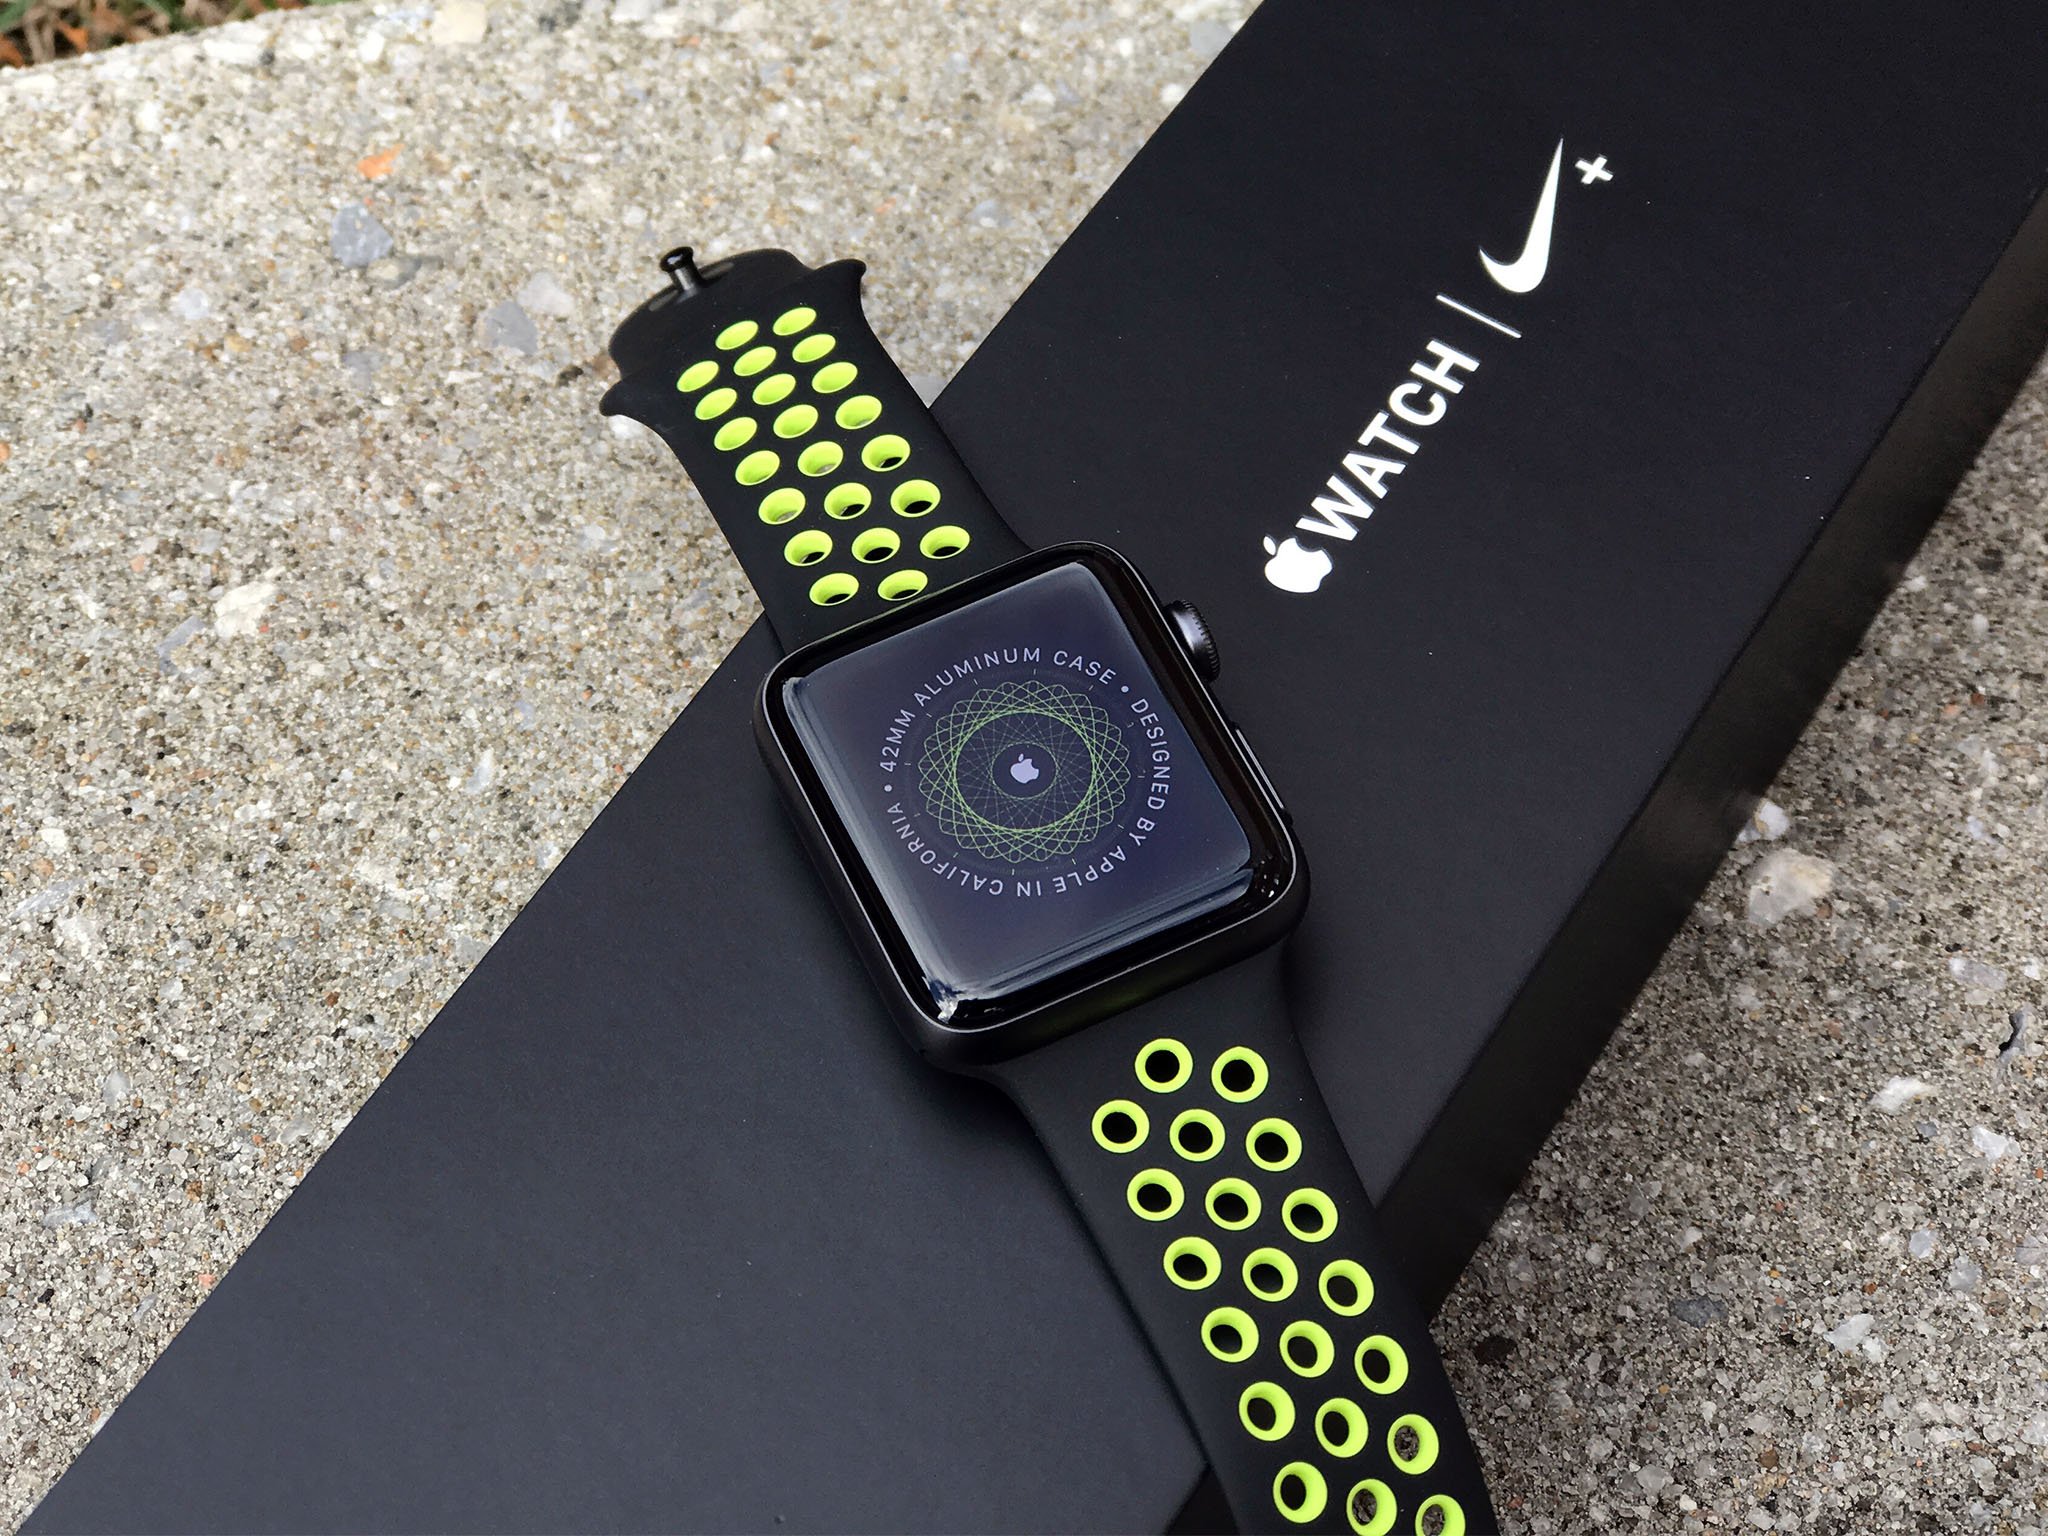 profound blanket apologize How to prepare your old Apple Watch for sale | iMore